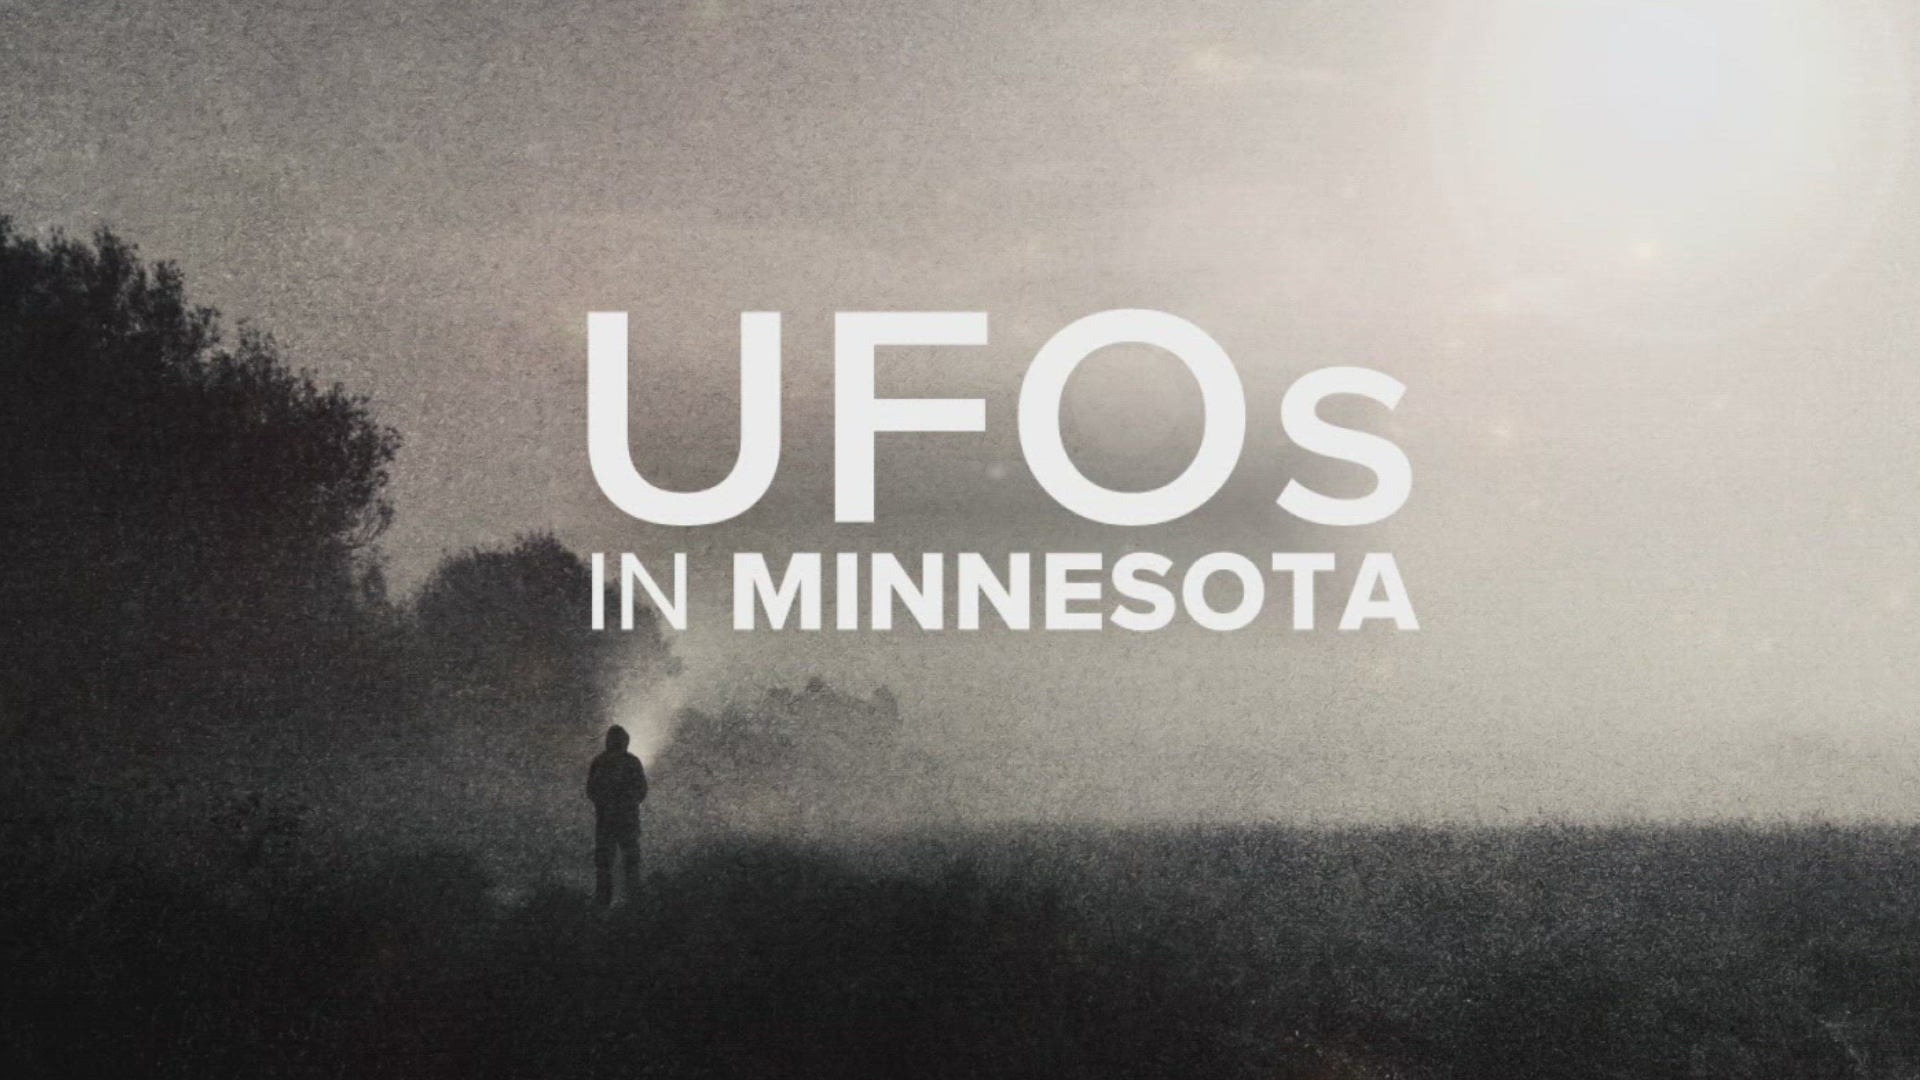 Unidentified Flying Objects had a moment in 2021, when the Pentagon released a report on unexplained sightings. Learn more about an infamous Midwest sighting.